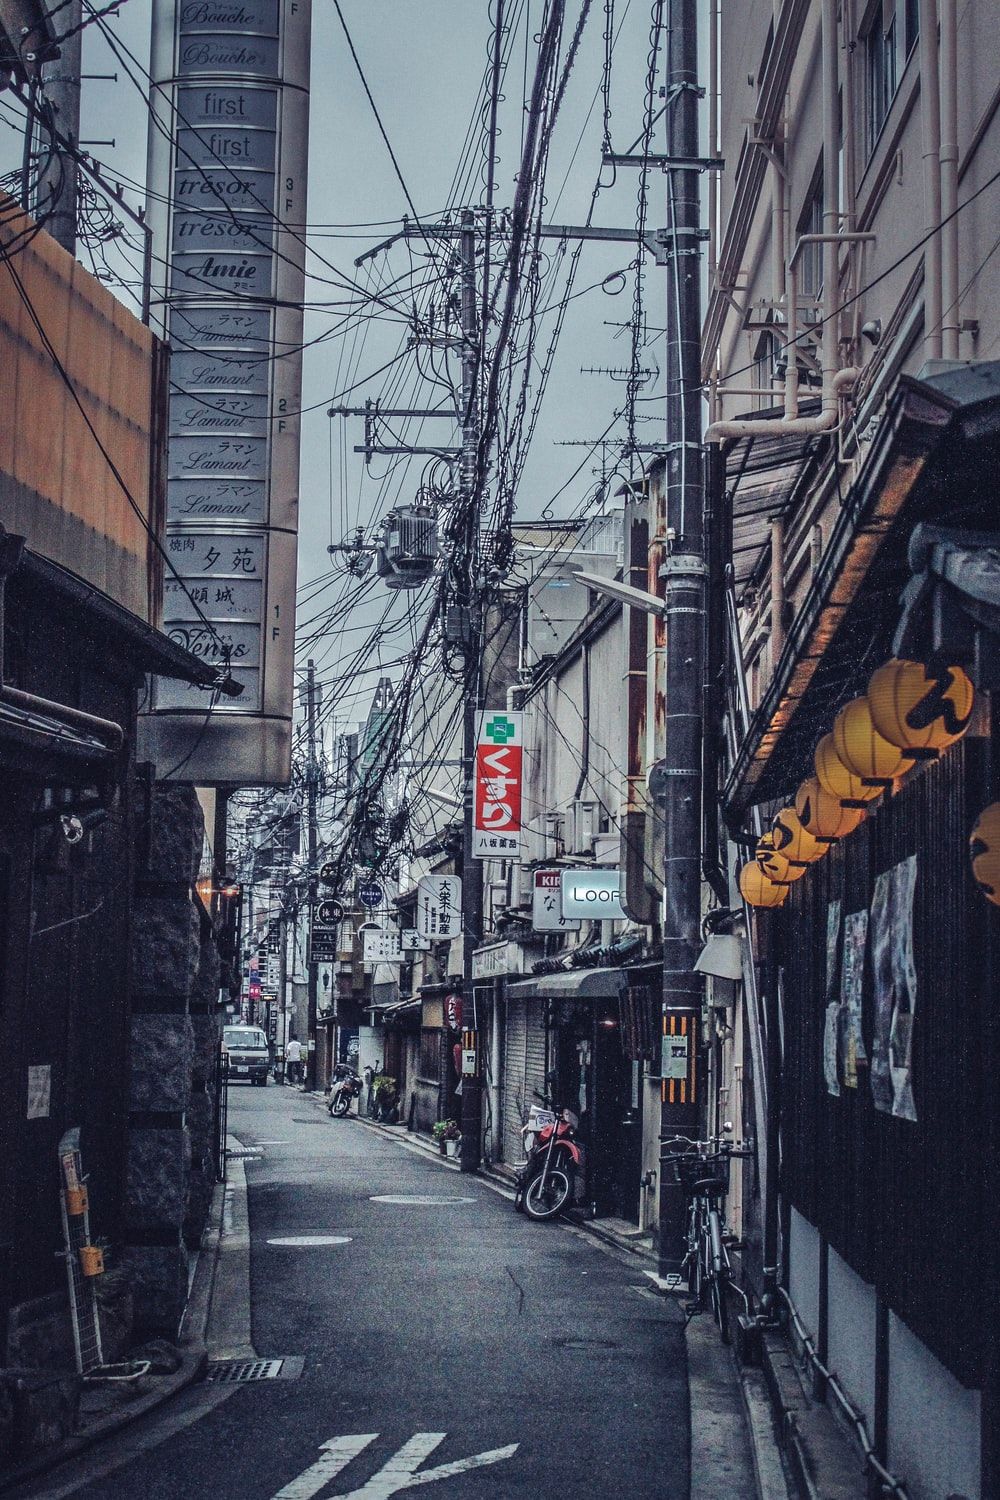 Japan Street Picture. Download Free Image